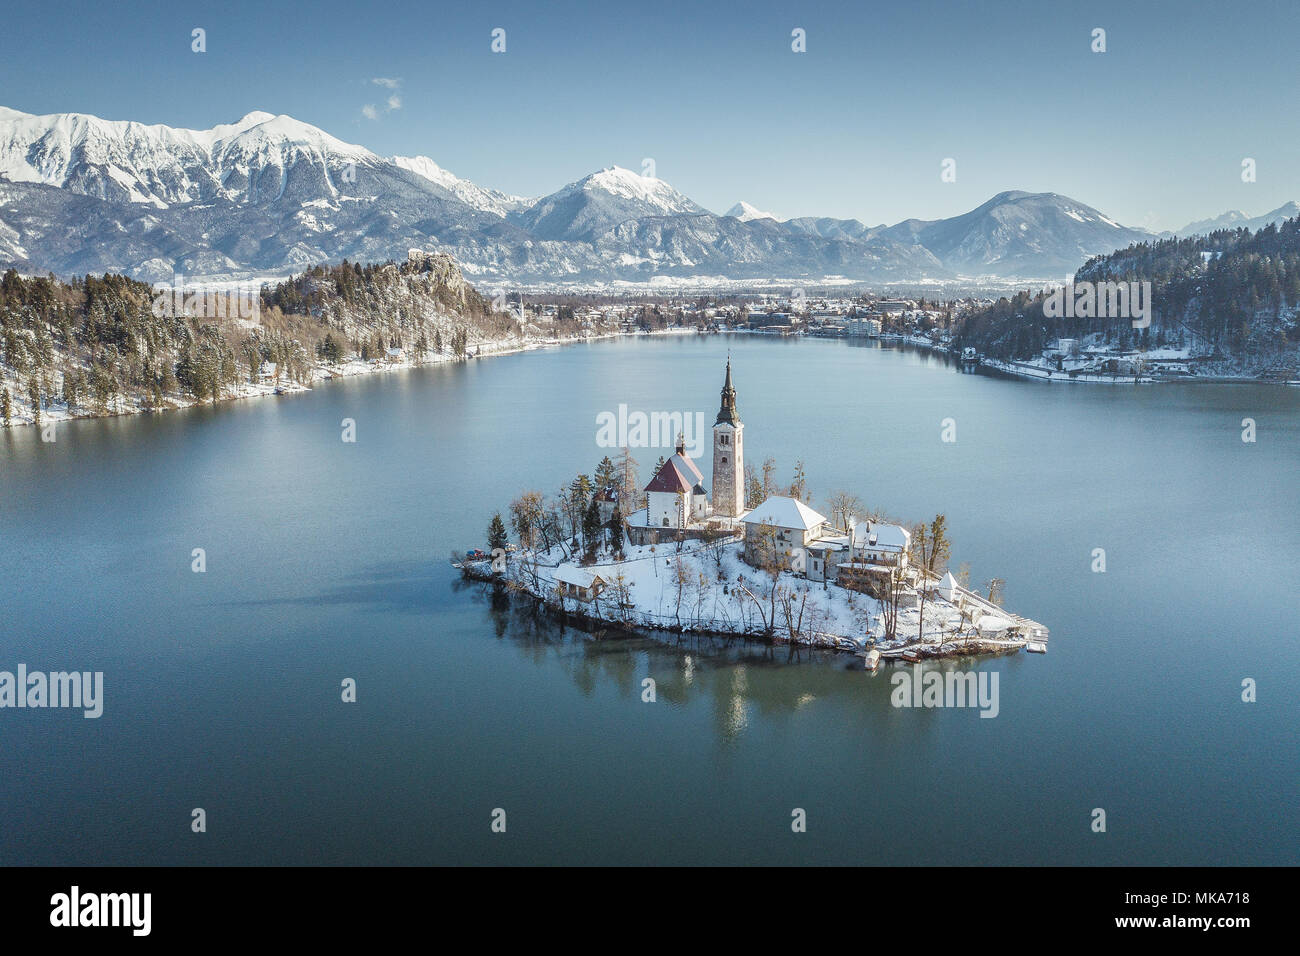 Panoramic view of famous Bled Island (Blejski otok) at scenic Lake Bled with Bled Castle (Blejski grad) and Julian Alps in the background on a beautif Stock Photo